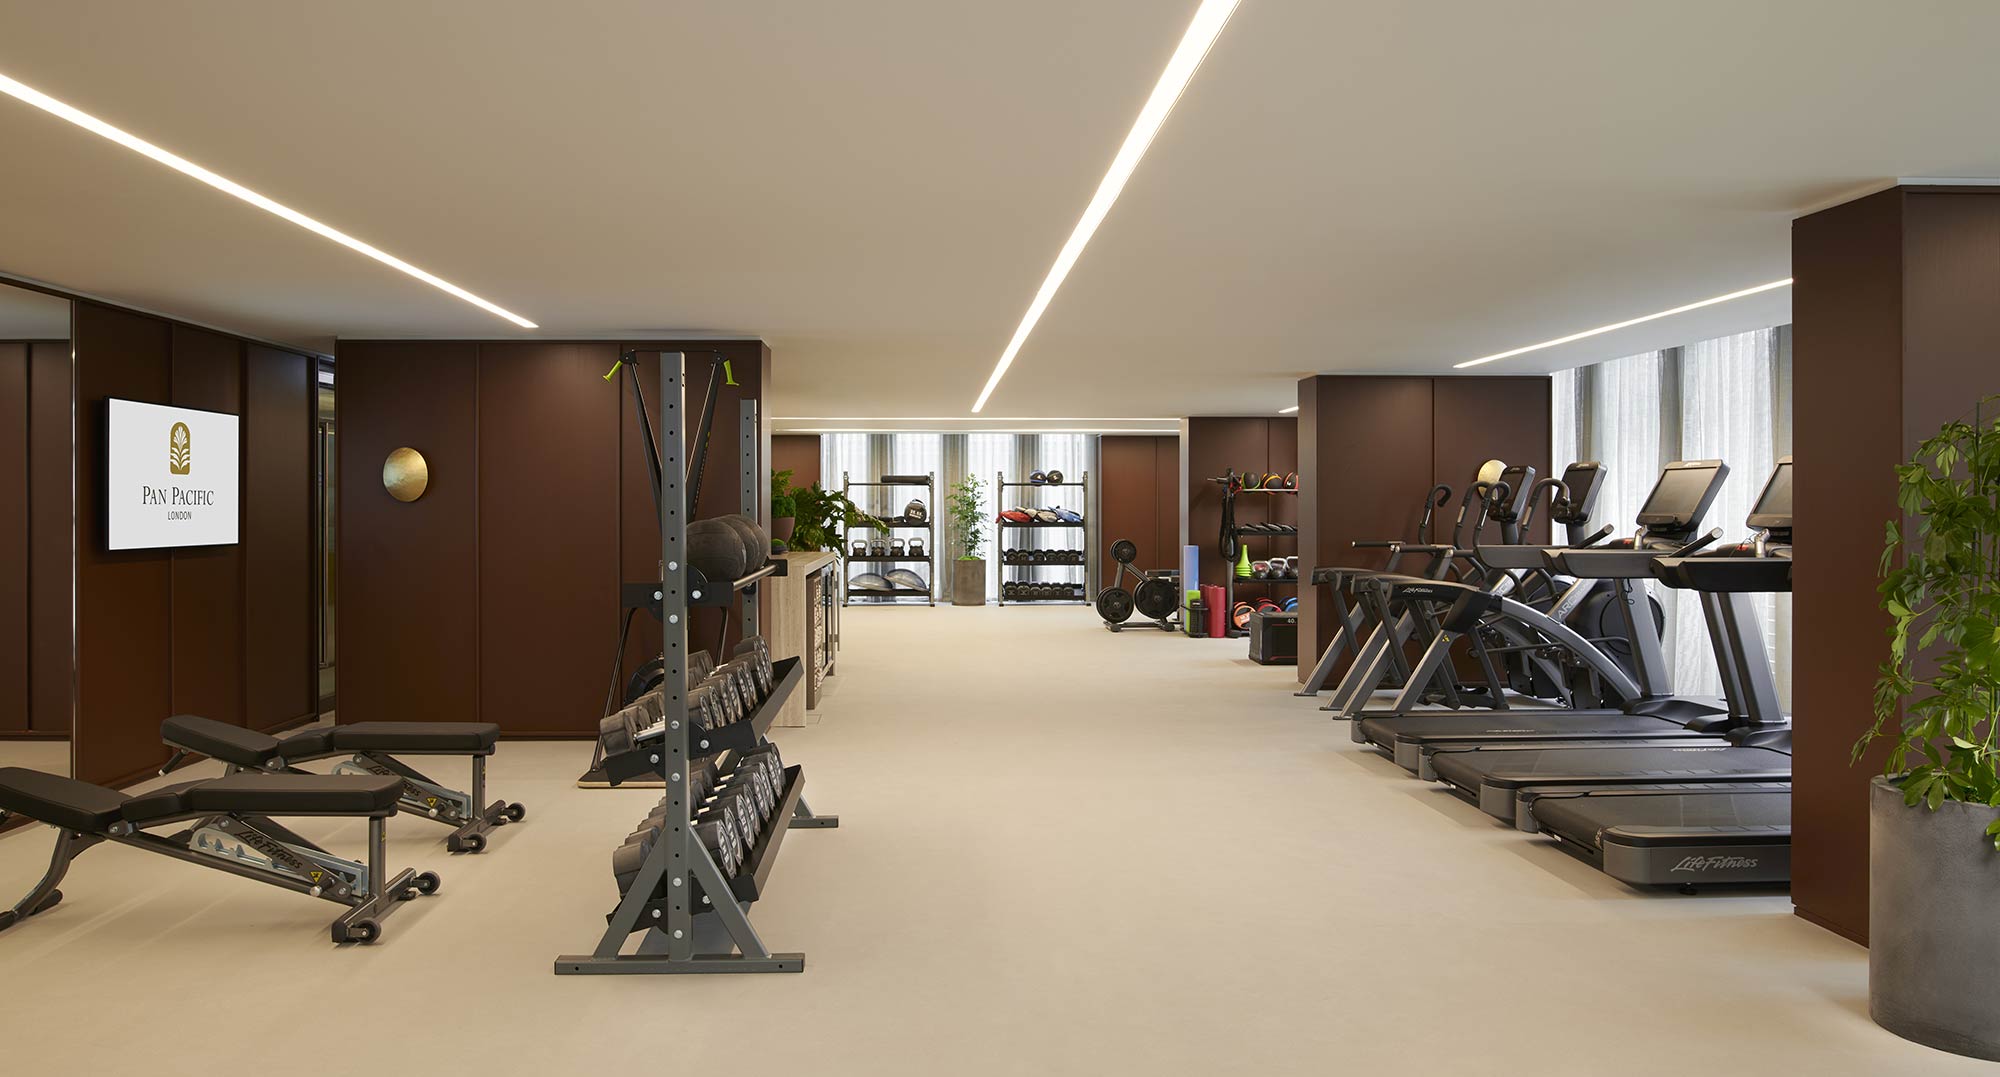 Gym located in Pan Pacific Hotel